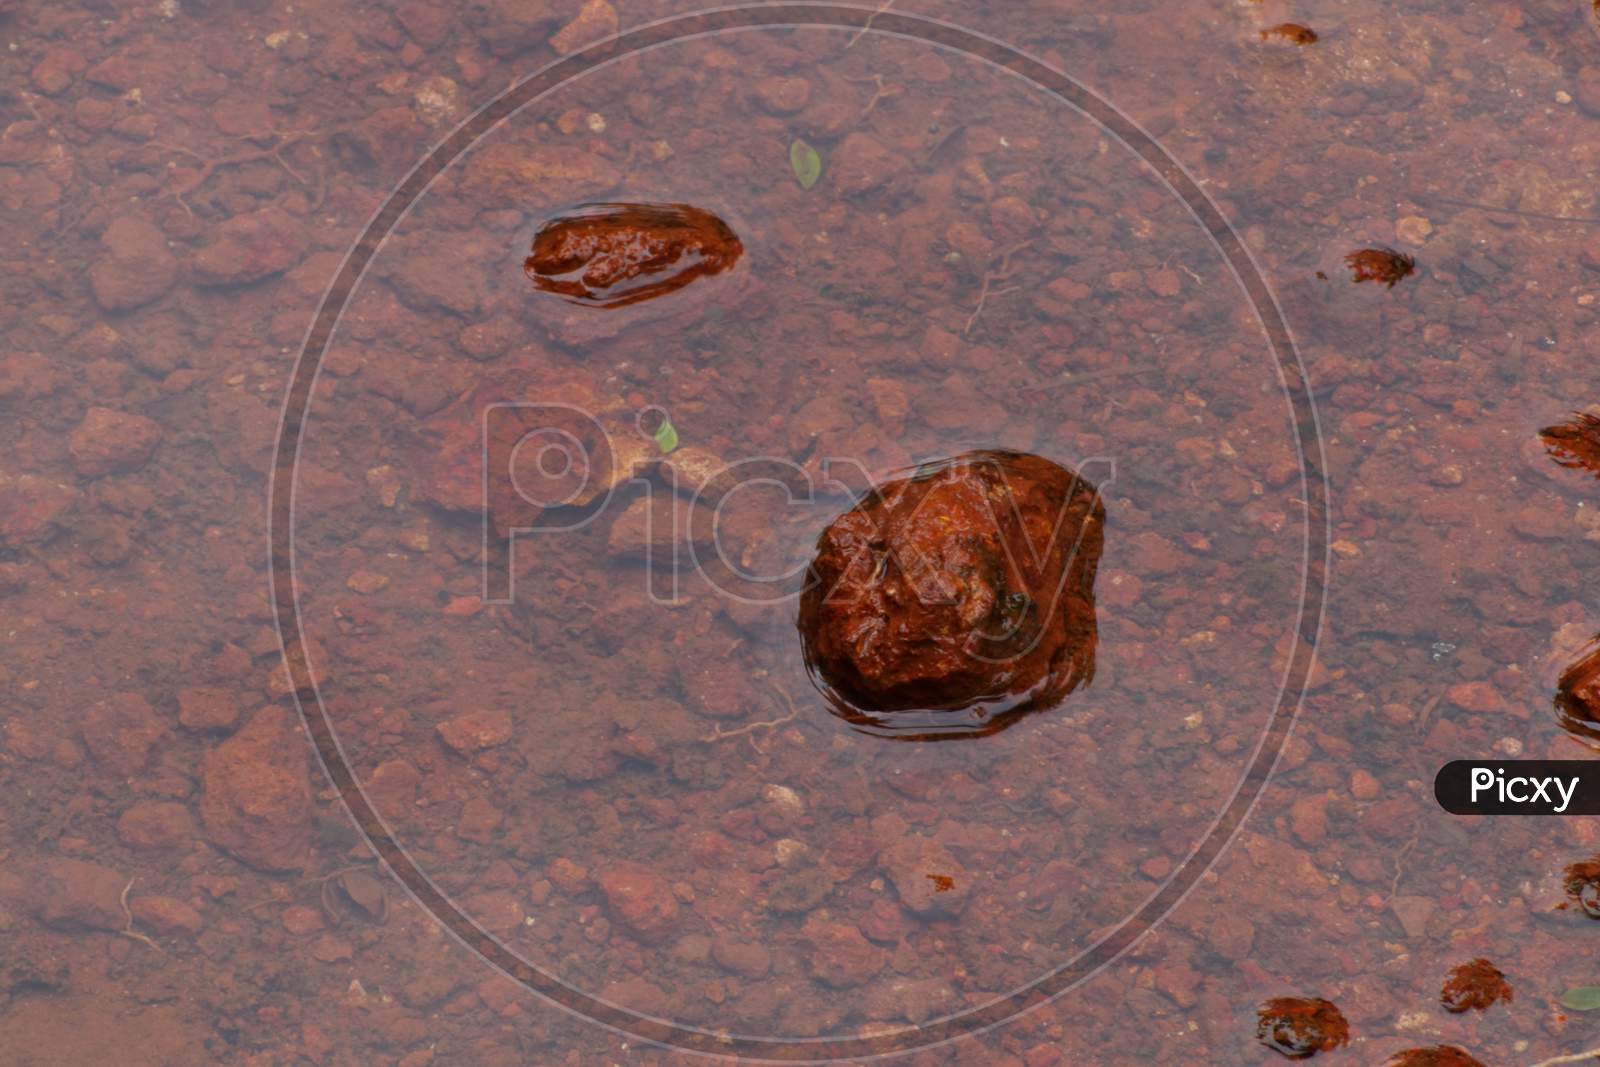 Red Stones Created Pattern In Water